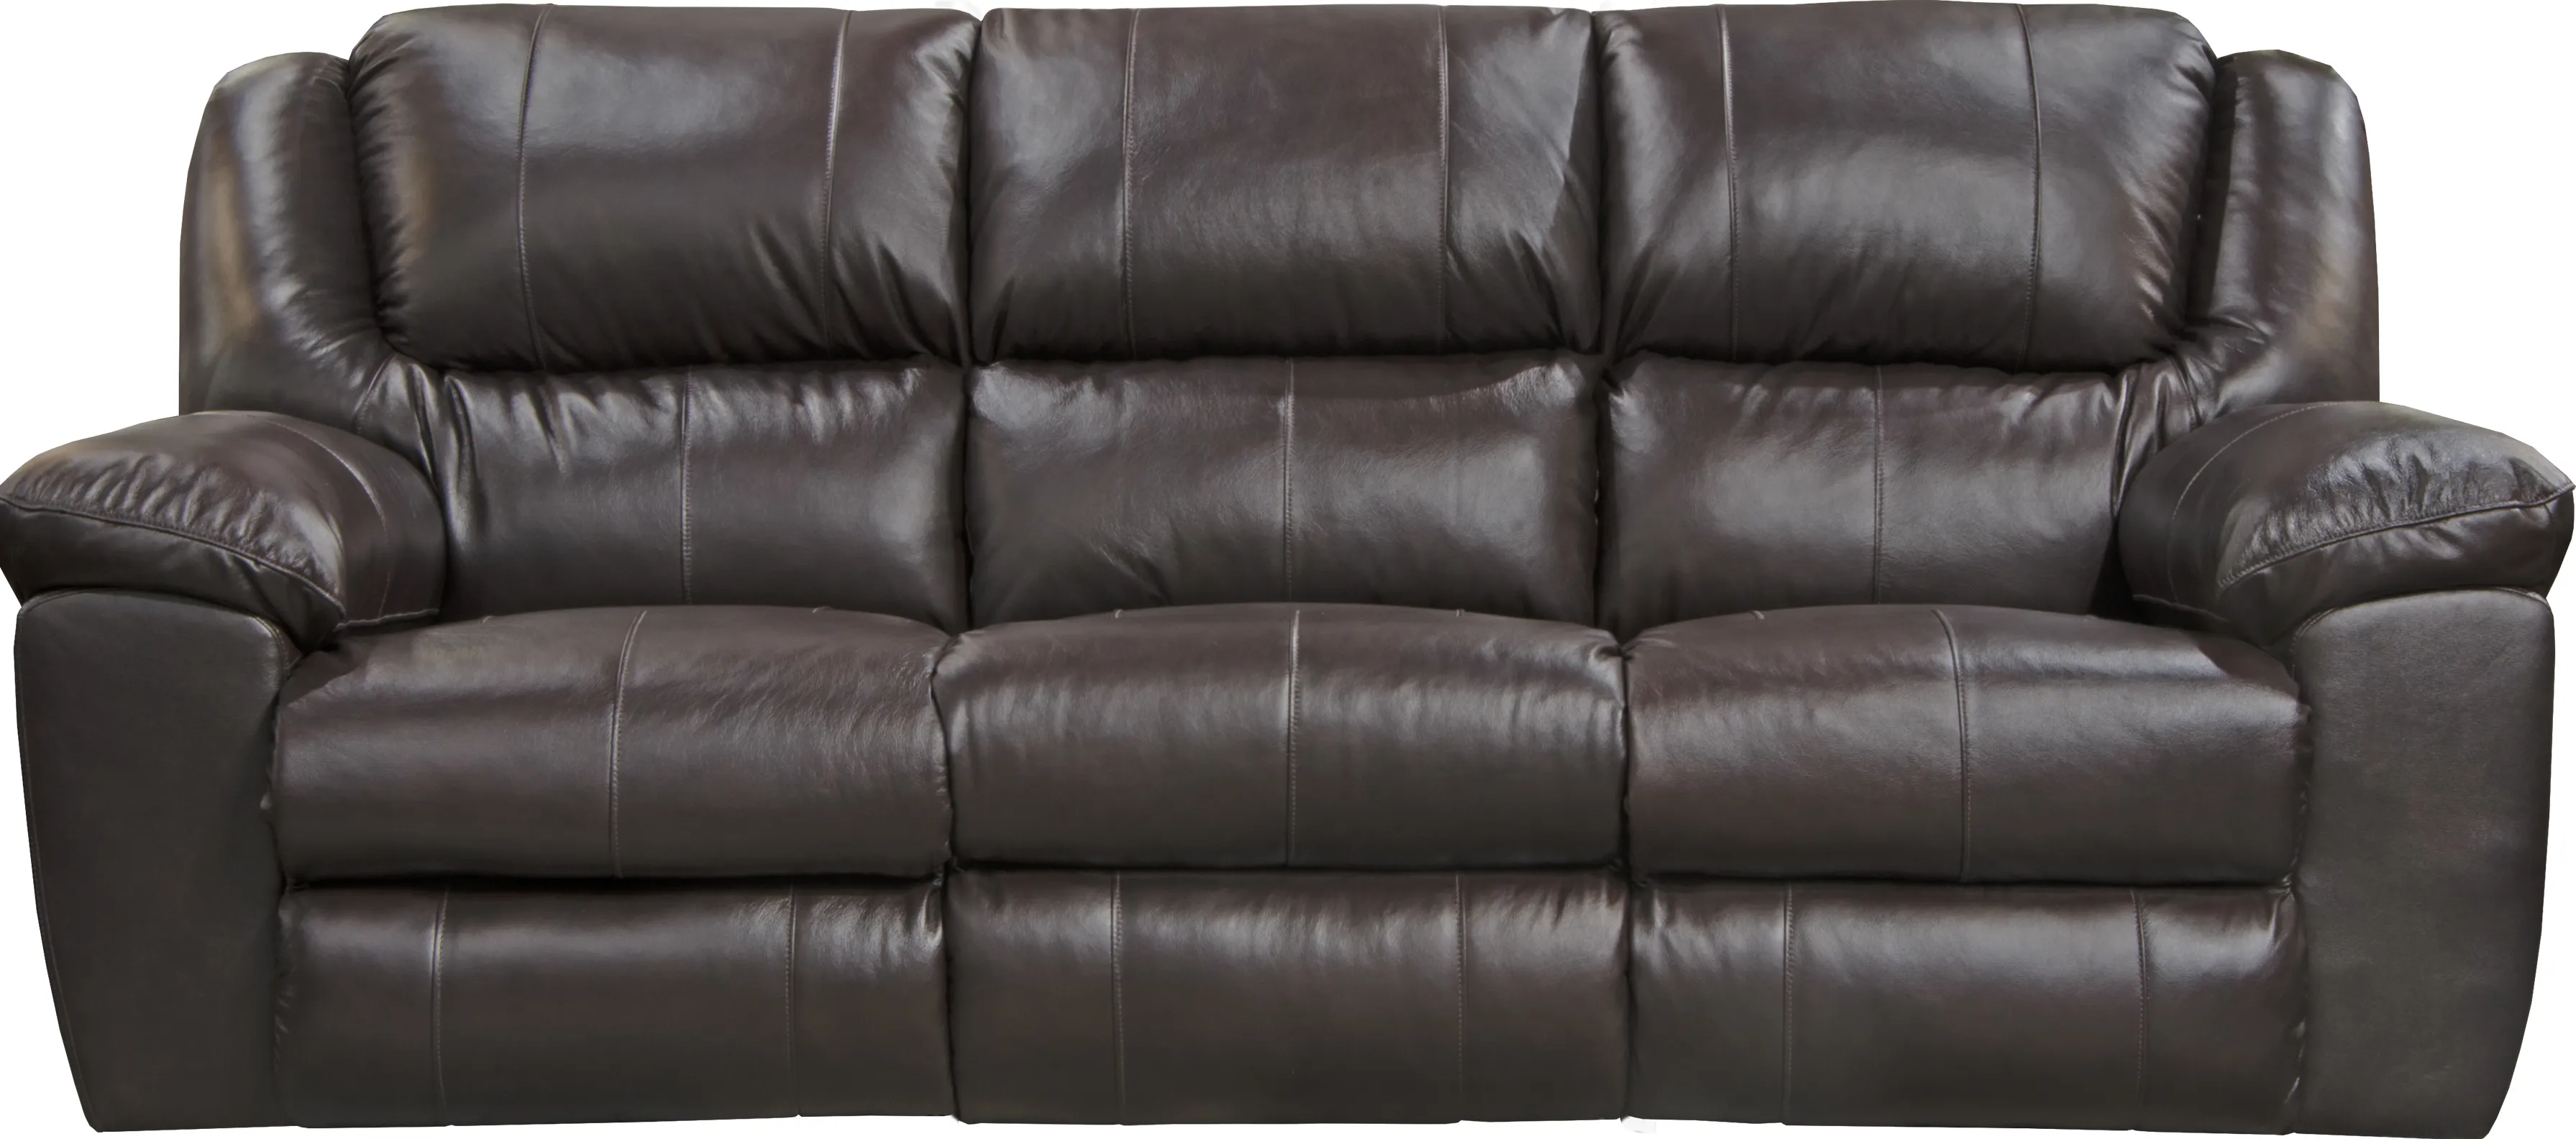 iAmerica Bruno Power Triple Recliner Sofa with Drop Down Table